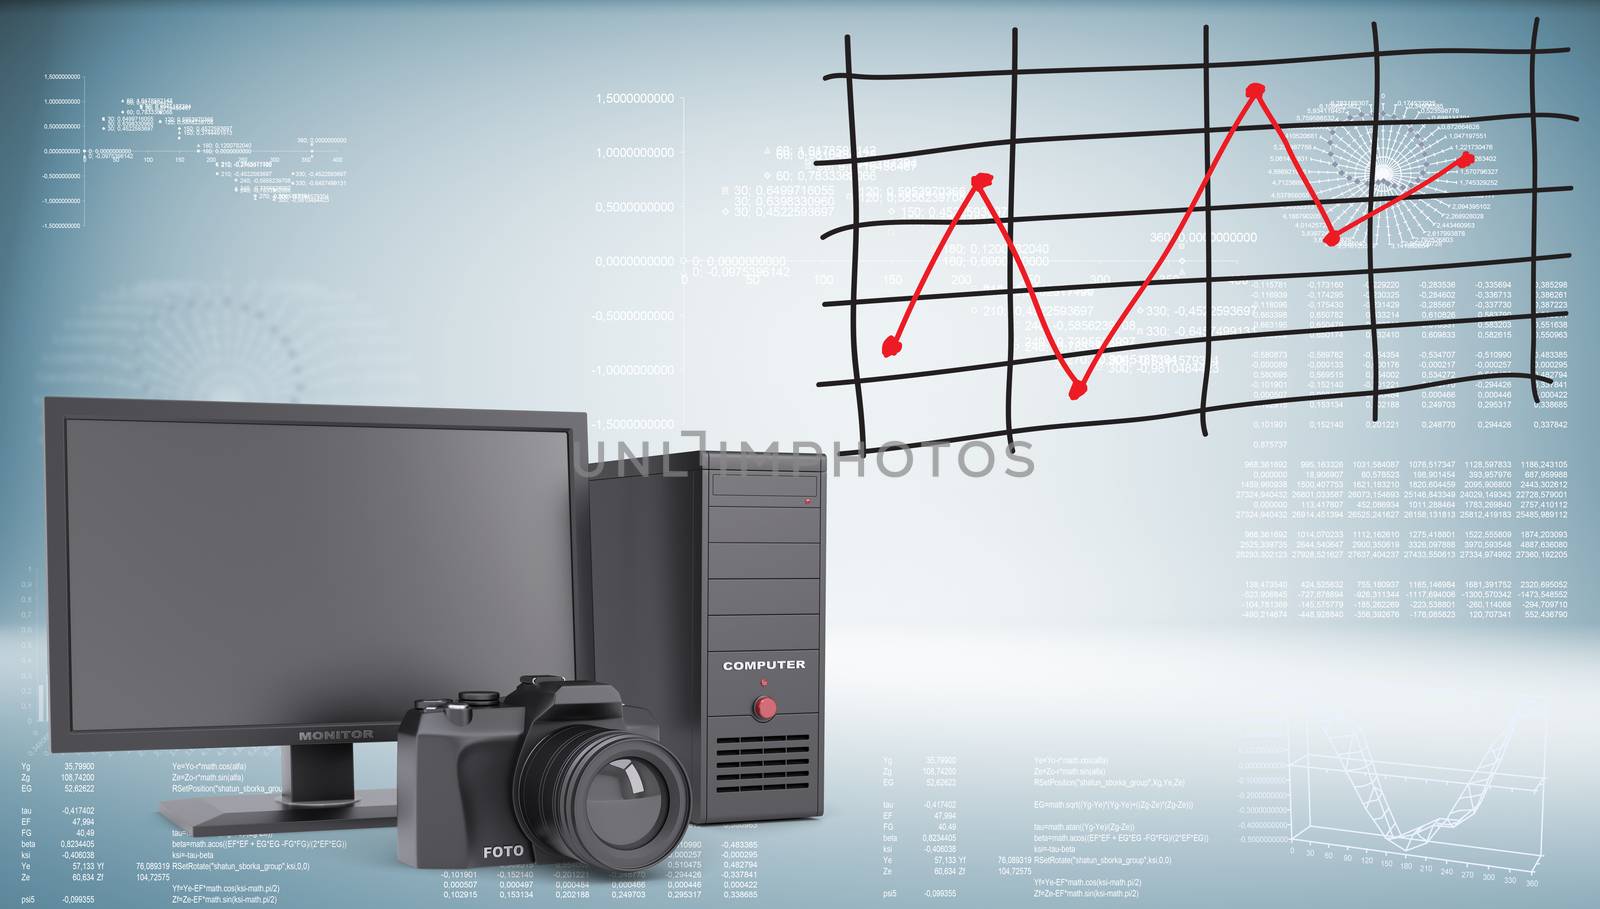 System unit, monitor, camera and graph of price changes by cherezoff